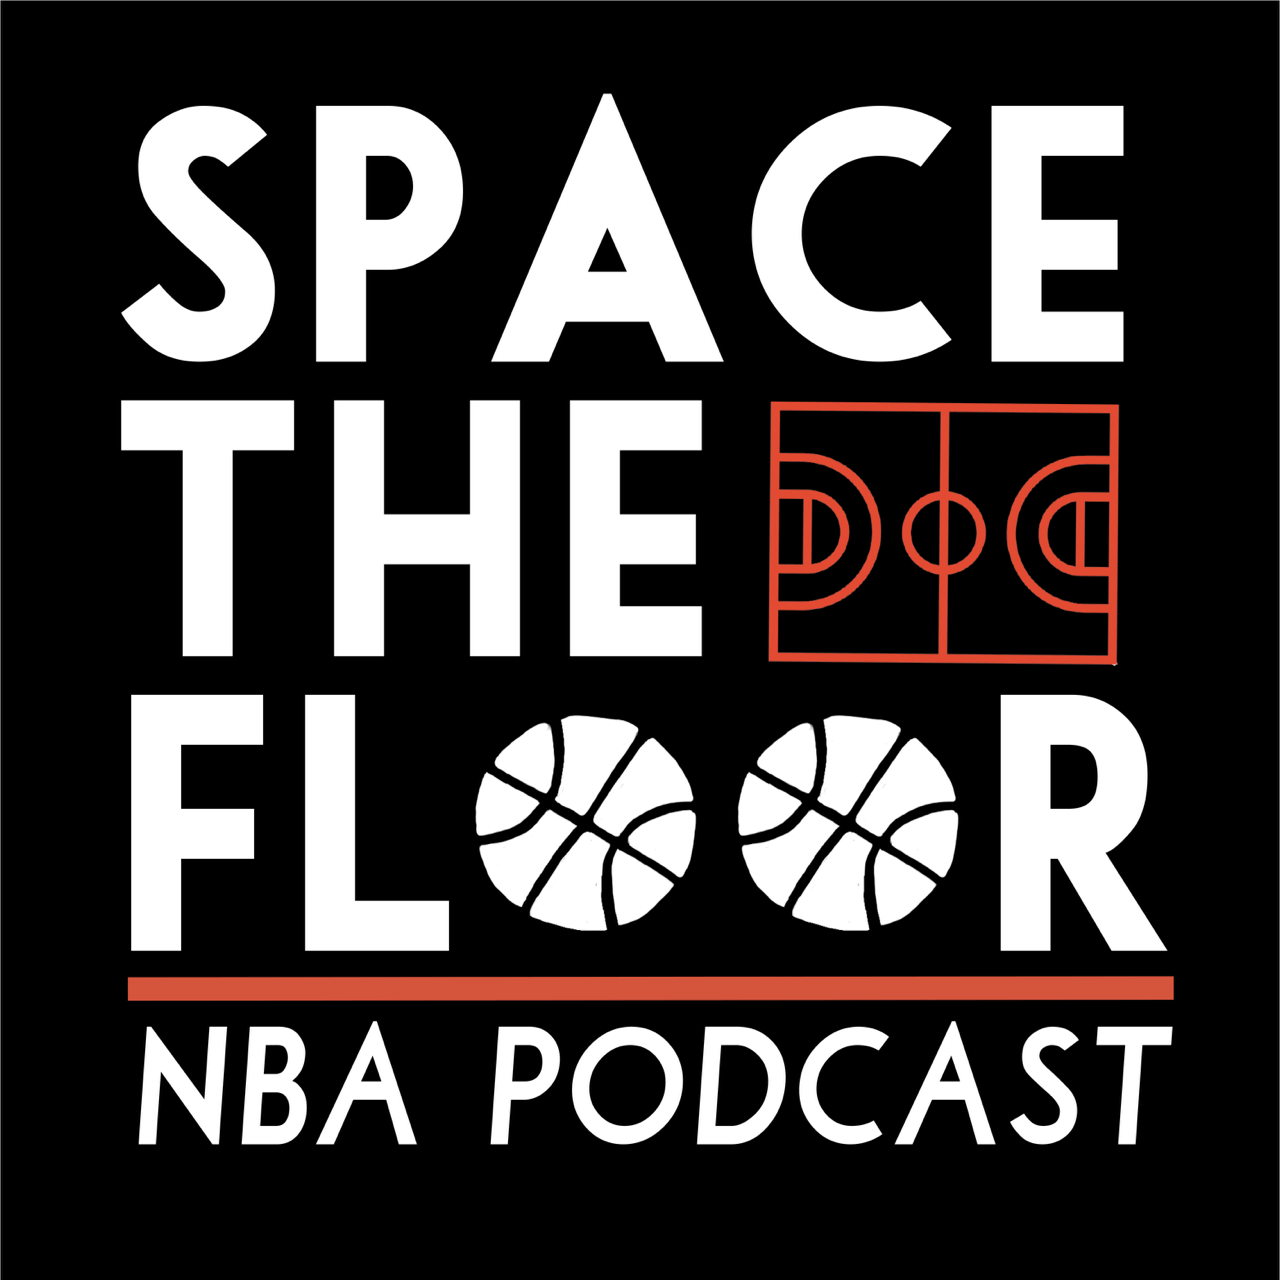 Space the Floor NBA Podcast podcast